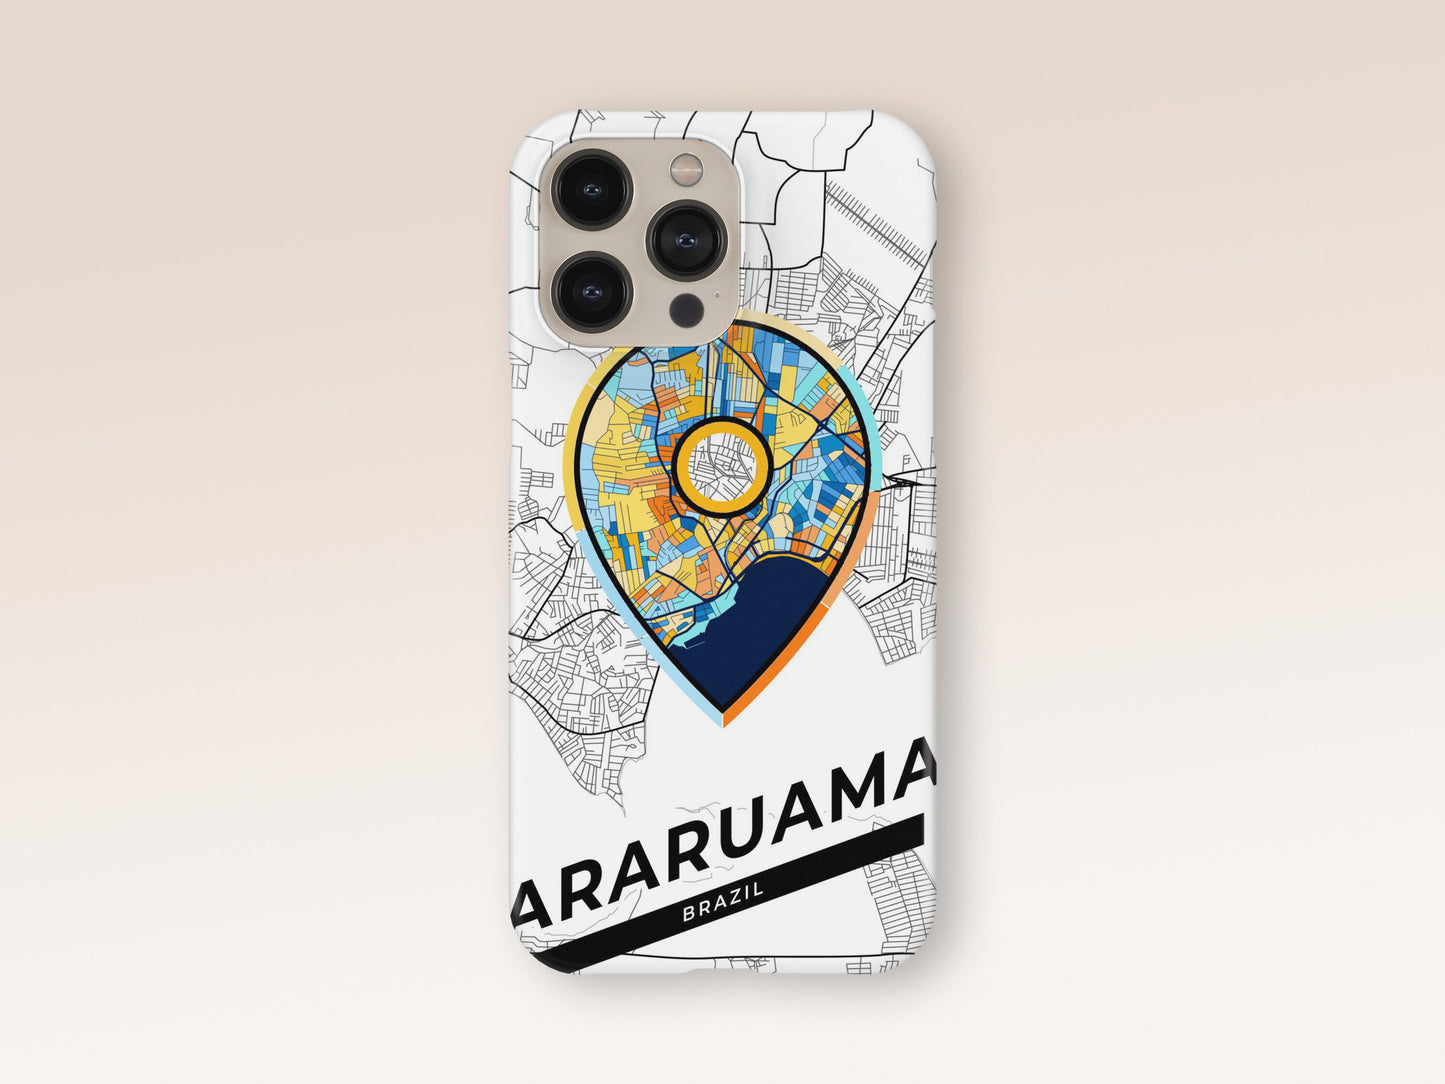 Araruama Brazil slim phone case with colorful icon. Birthday, wedding or housewarming gift. Couple match cases. 1